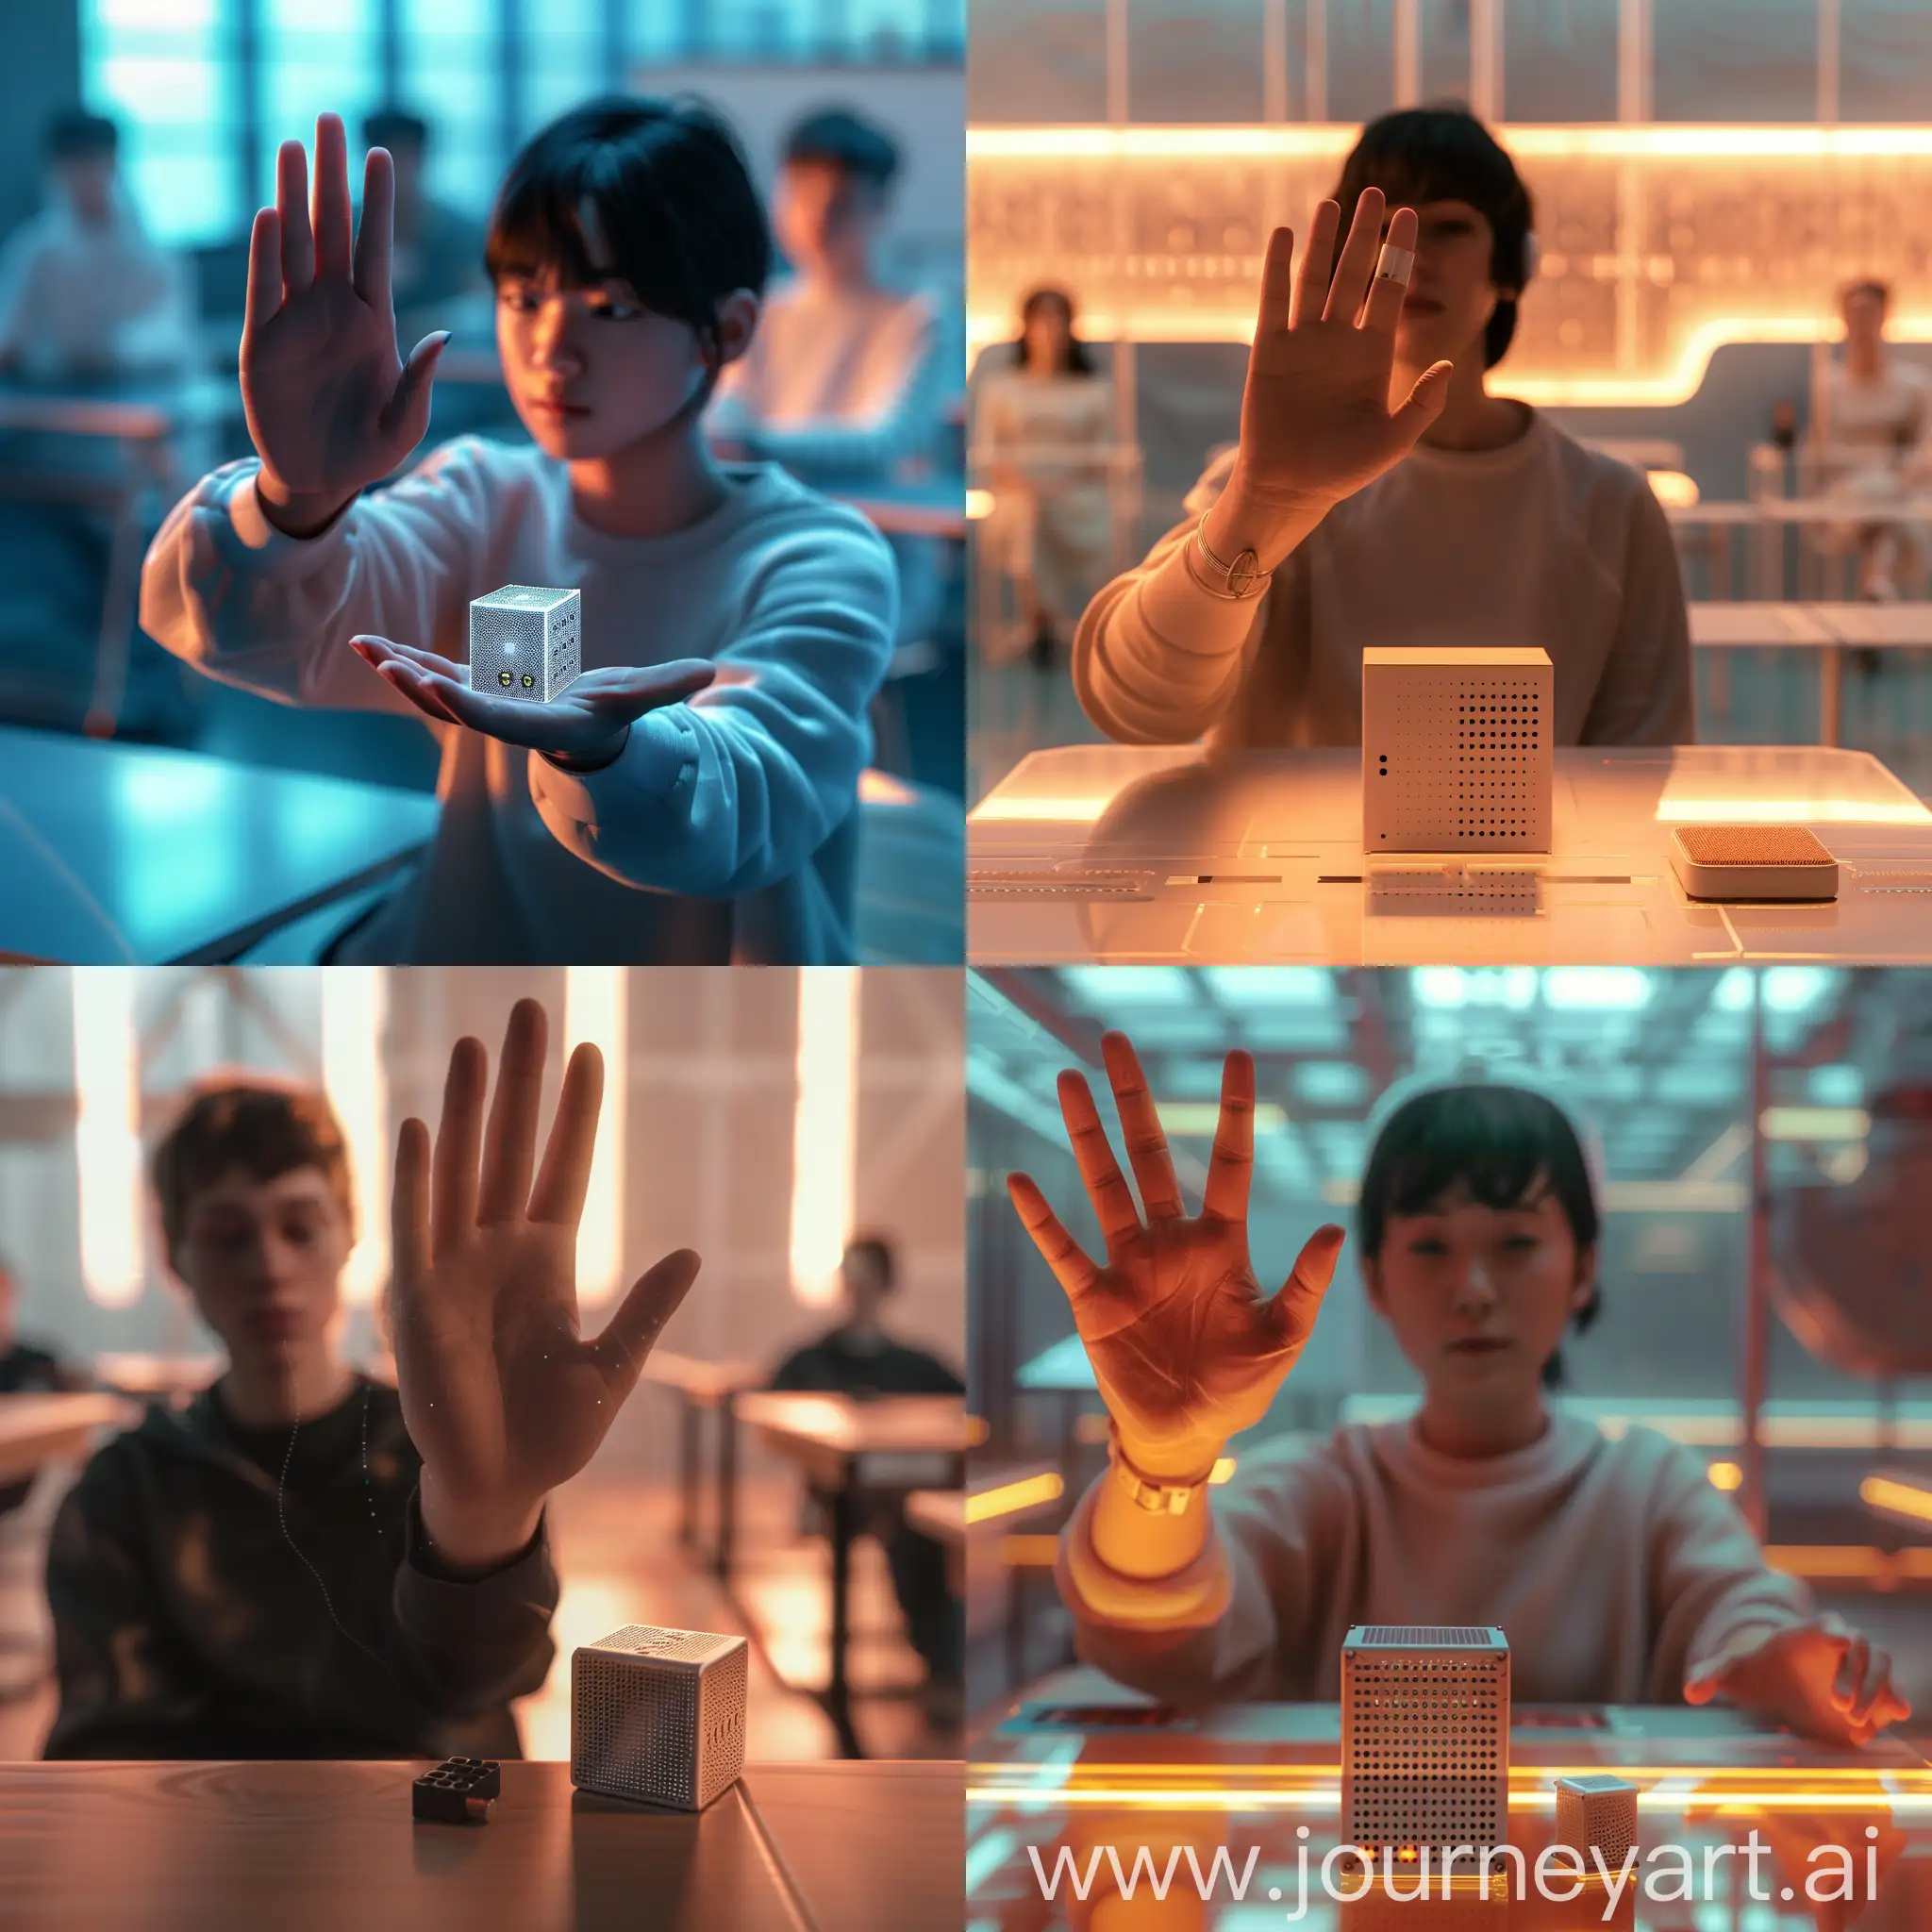 photo realistic Hyperbole,8k photo of a person sitting in front of the camera, one hand raised , palm facing down, small box with tiny holes, small box has tiny speakers,  under the palm of the hand, palm faced down, in an educational environment, the image focuses on their upper body and hands as they interact , which are indicated by their focused gaze and hand movements in the empty space in front of them, The person is surrounded by a futuristic classroom setting, illuminated with soft, ambient lighting,